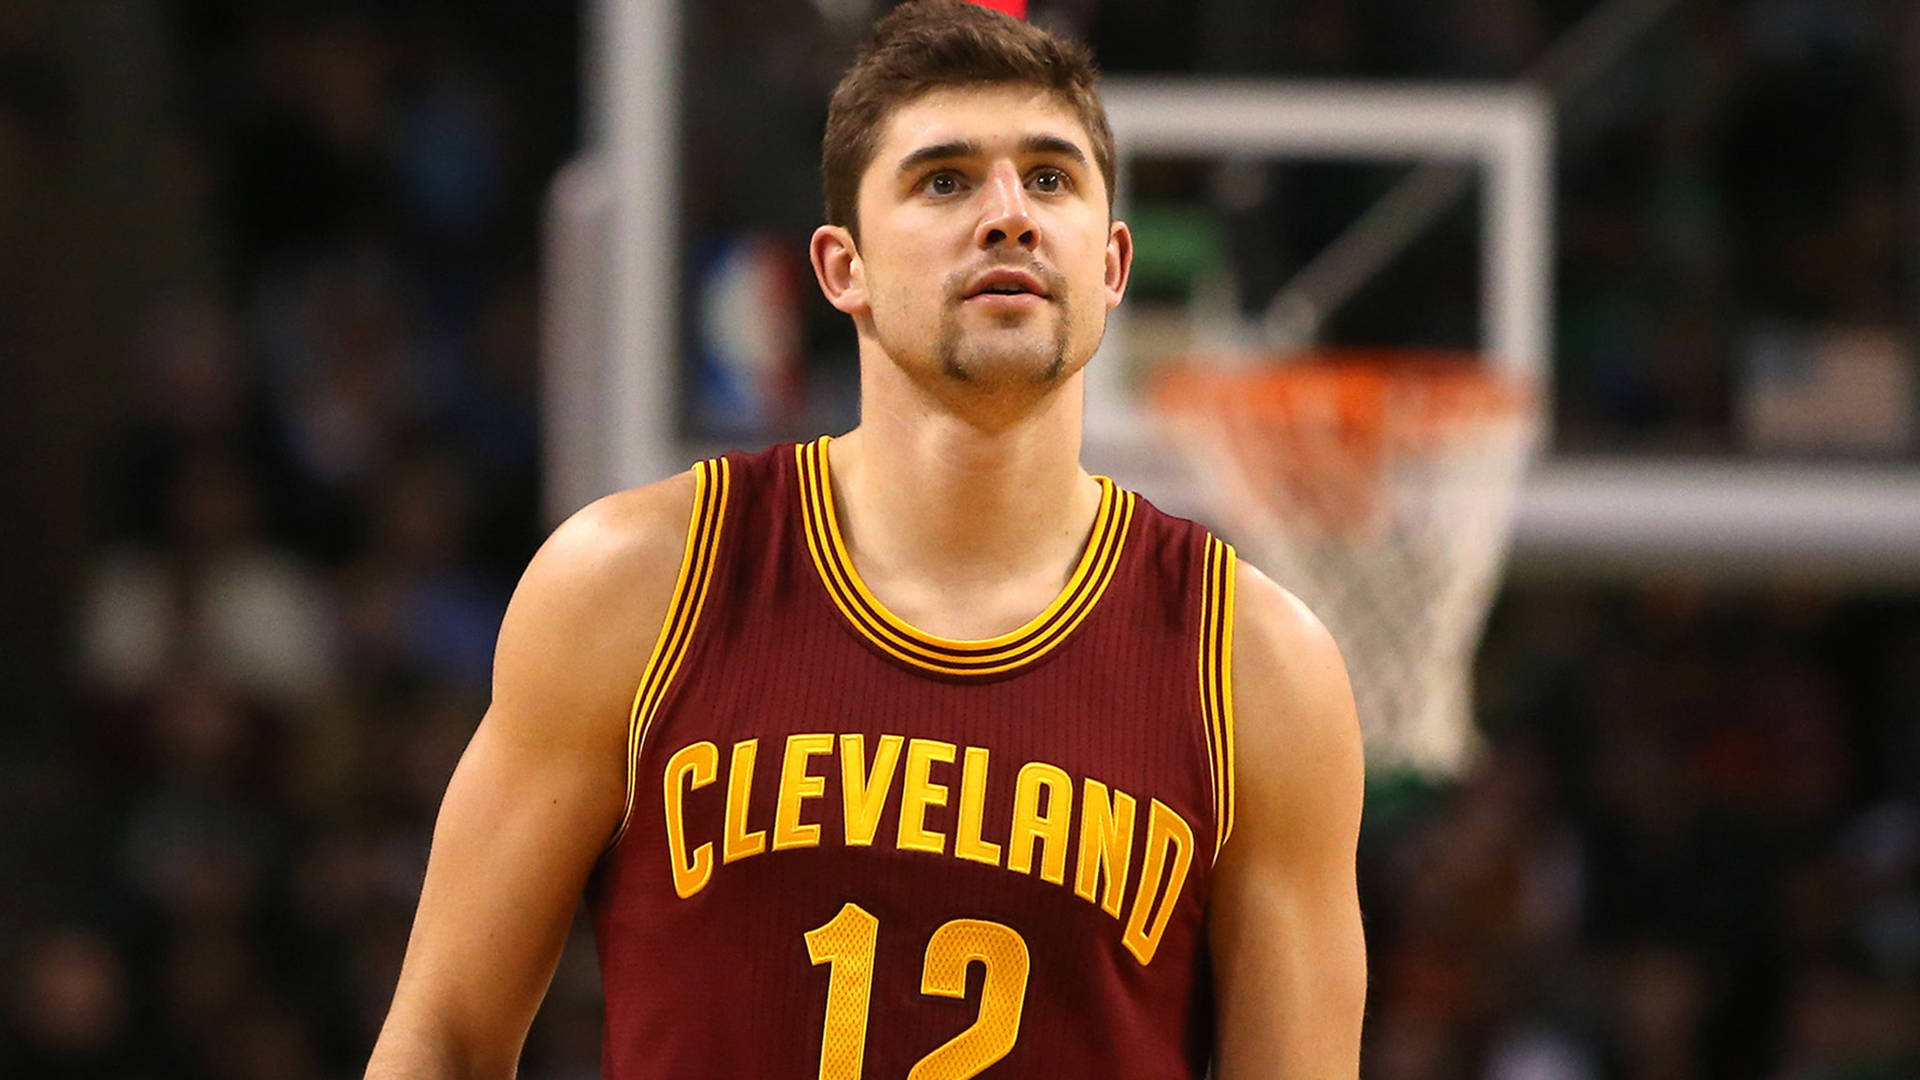 Cavalierjoe Harris Does Not Need A Translation As It Is Already In English. However, If You Meant To Say 